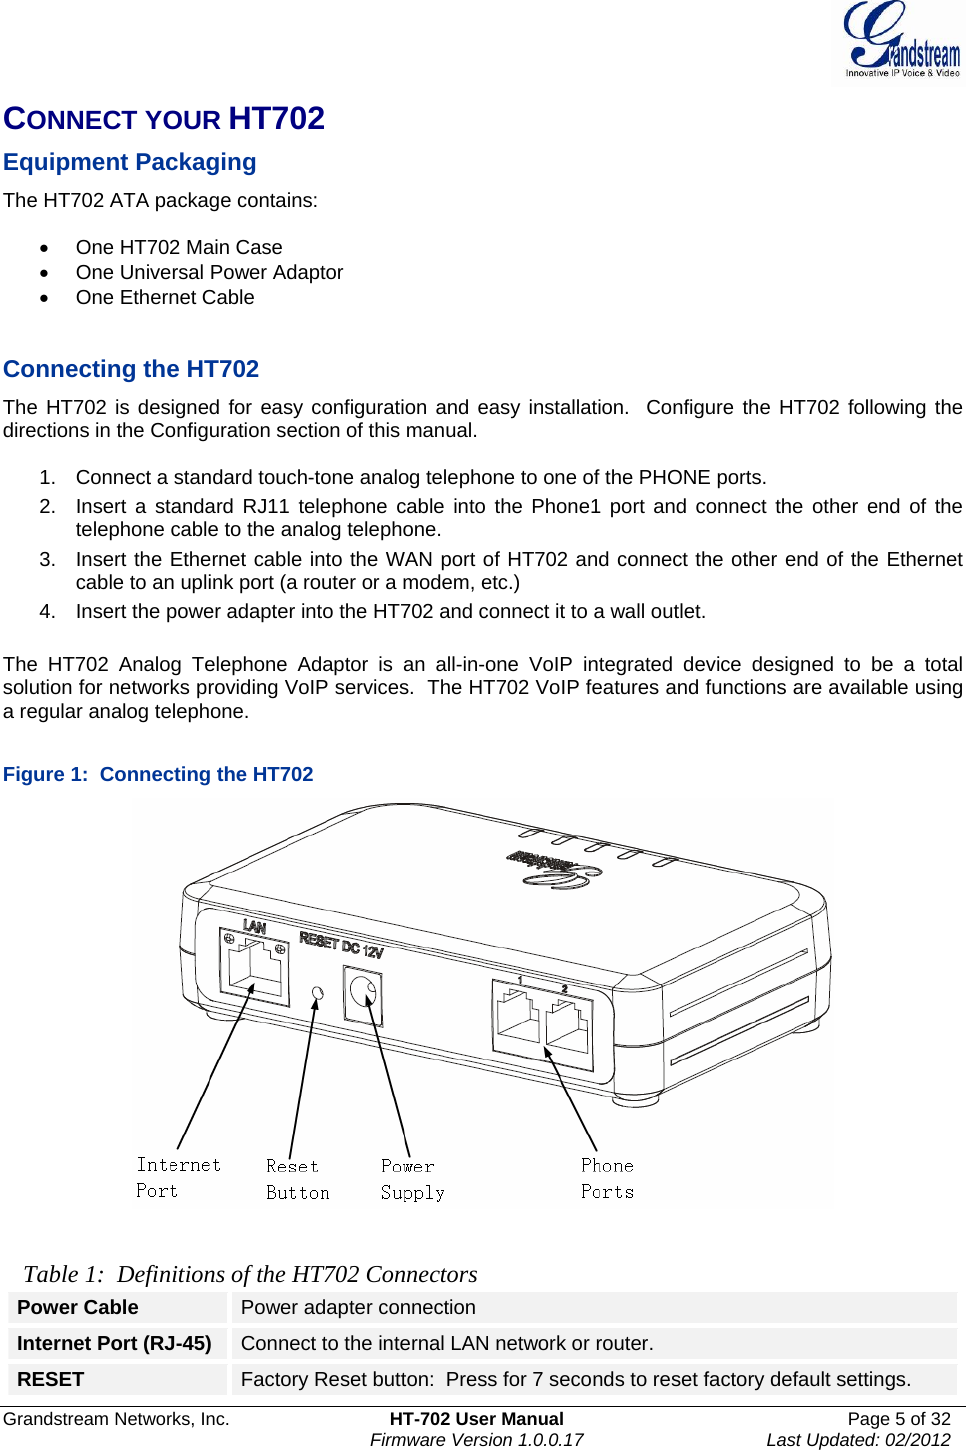  Grandstream Networks, Inc.  HT-702 User Manual  Page 5 of 32    Firmware Version 1.0.0.17  Last Updated: 02/2012  CONNECT YOUR HT702  Equipment Packaging The HT702 ATA package contains:  •  One HT702 Main Case •  One Universal Power Adaptor •  One Ethernet Cable   Connecting the HT702 The HT702 is designed for easy configuration and easy installation.  Configure the HT702 following the directions in the Configuration section of this manual.   1.  Connect a standard touch-tone analog telephone to one of the PHONE ports. 2.  Insert a standard RJ11 telephone cable into the Phone1 port and connect the other end of the telephone cable to the analog telephone. 3.  Insert the Ethernet cable into the WAN port of HT702 and connect the other end of the Ethernet cable to an uplink port (a router or a modem, etc.) 4.  Insert the power adapter into the HT702 and connect it to a wall outlet.   The HT702 Analog Telephone Adaptor is an all-in-one VoIP integrated device designed to be a total solution for networks providing VoIP services.  The HT702 VoIP features and functions are available using a regular analog telephone.   Figure 1:  Connecting the HT702    Table 1:  Definitions of the HT702 Connectors Power Cable  Power adapter connection Internet Port (RJ-45)  Connect to the internal LAN network or router. RESET  Factory Reset button:  Press for 7 seconds to reset factory default settings. 